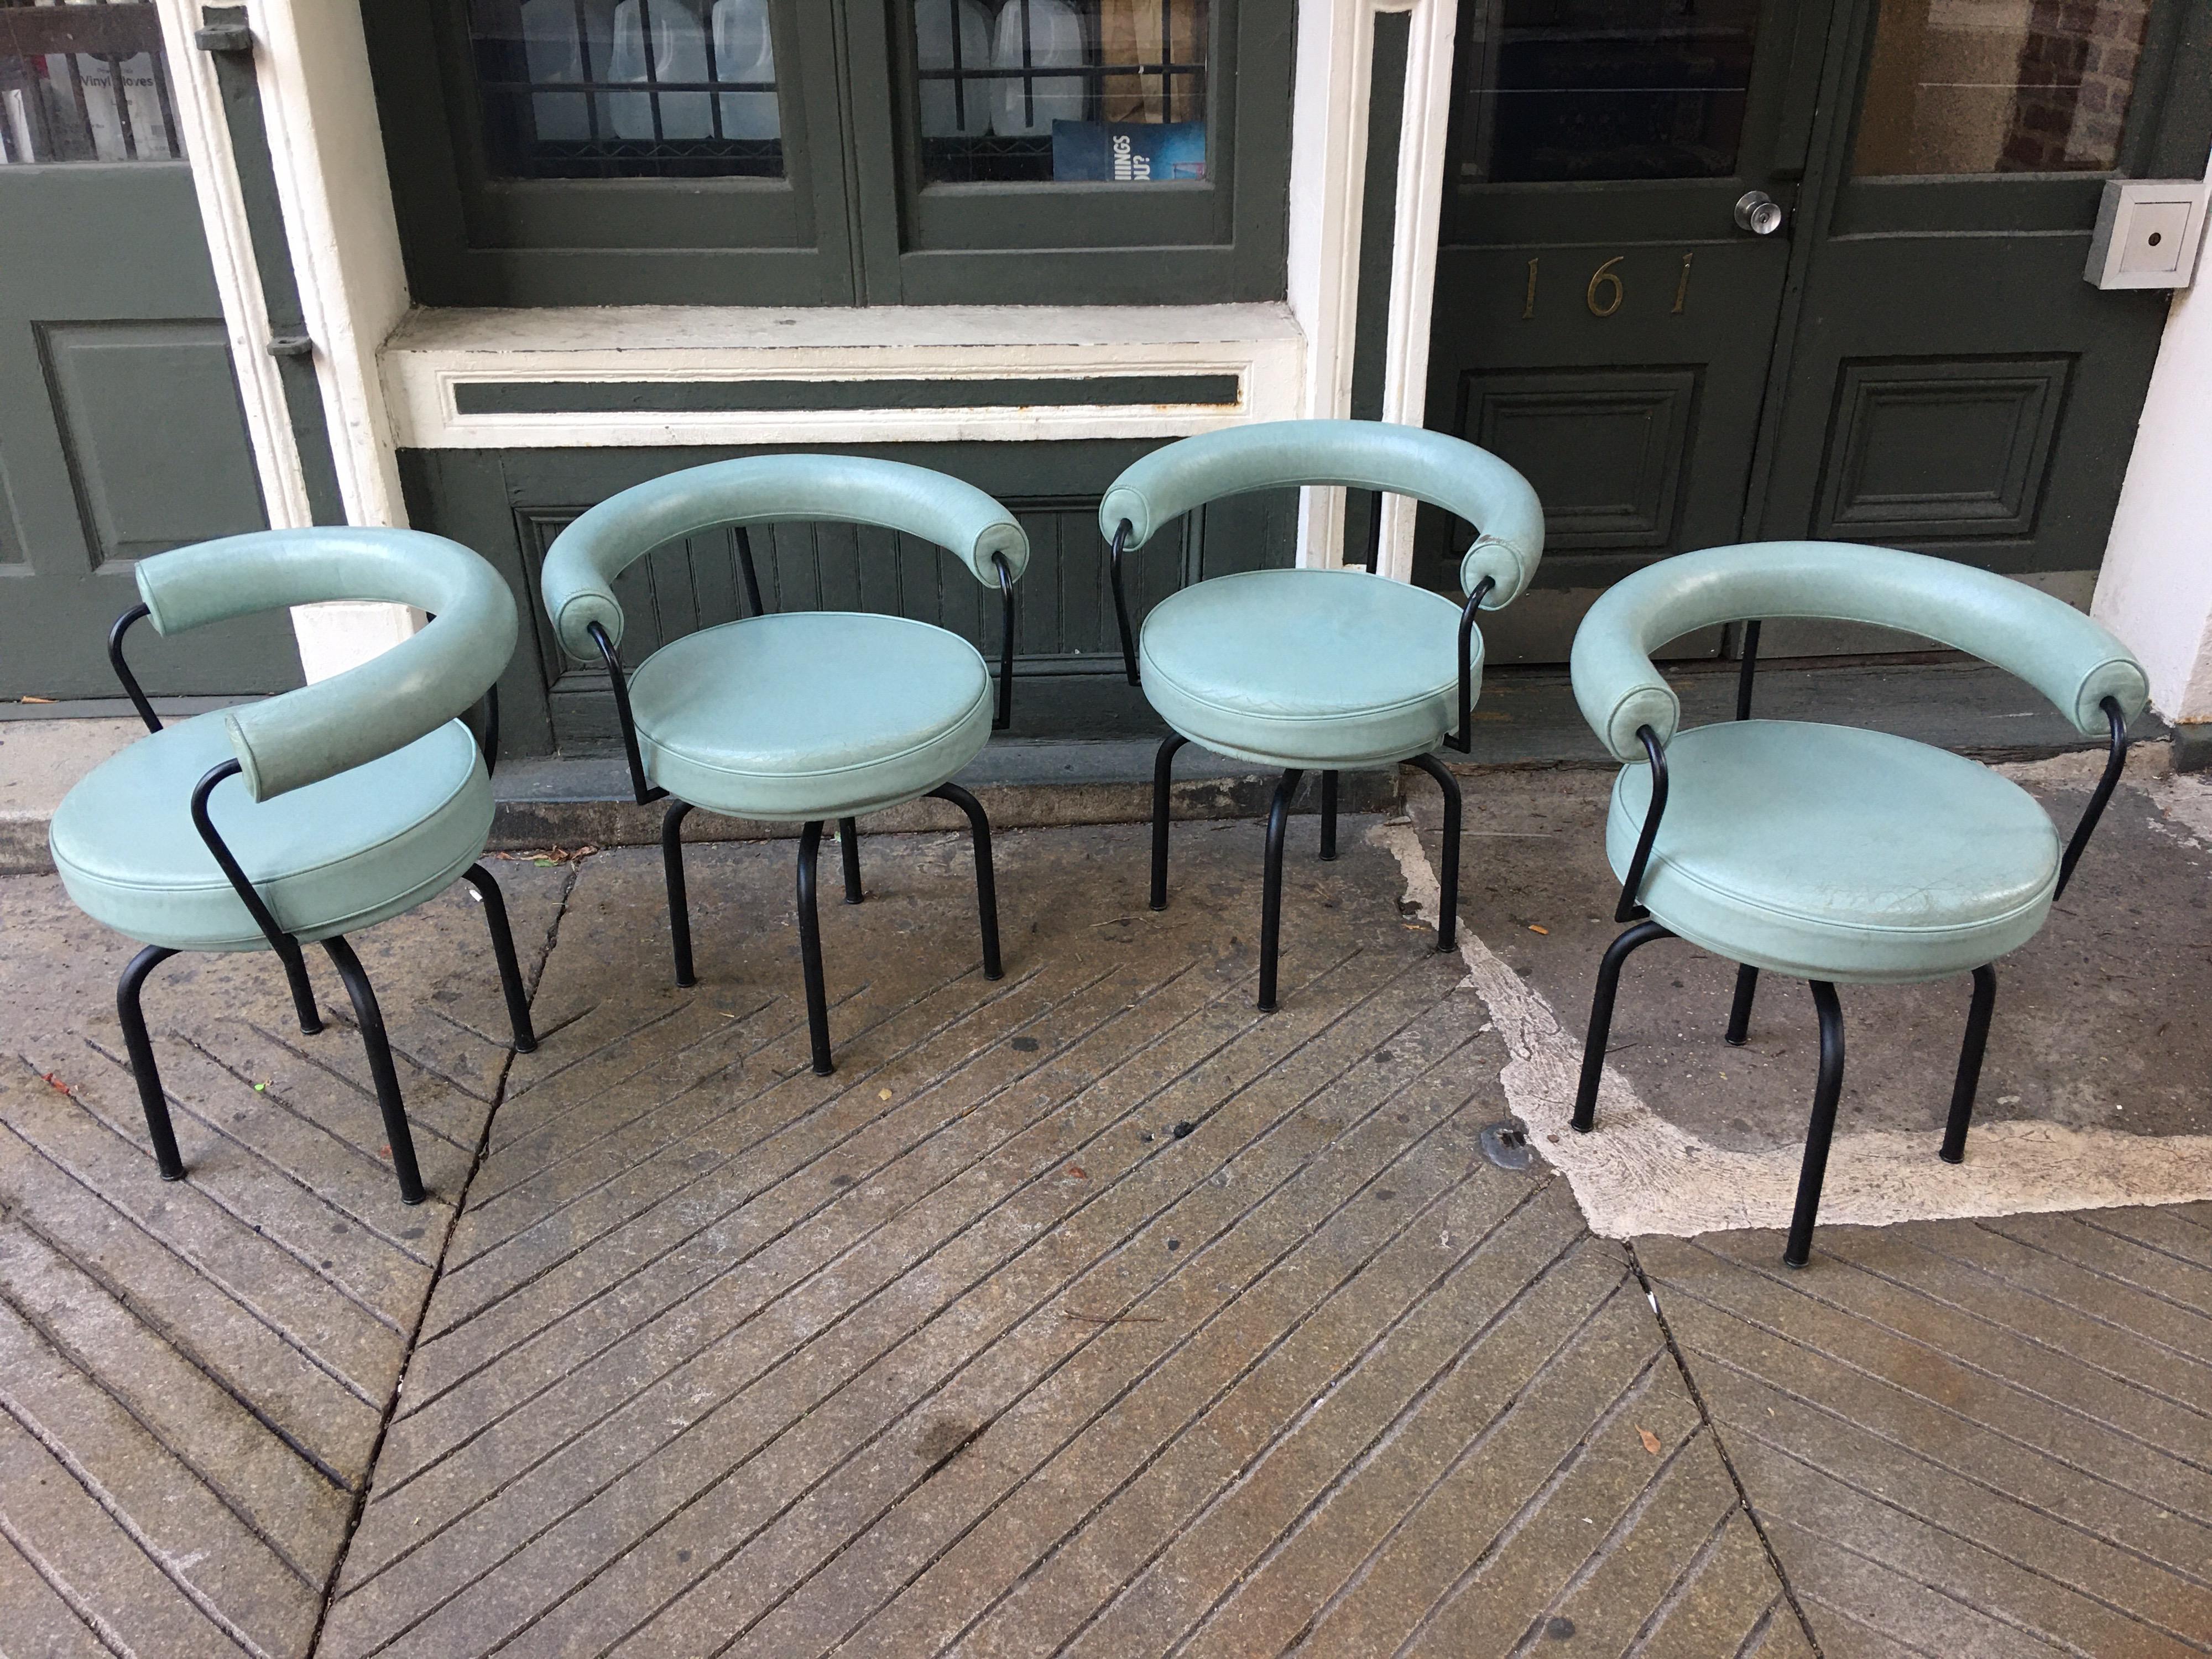 Set of 4 Cassina Swivel LC7 armchairs in a Robin egg blue leather. Frames are done in a flat black finish which is all original. Chairs date from the early 1990s. Originally designed in the late 1920s by Le Corbusier, Perriand and Jenneret.